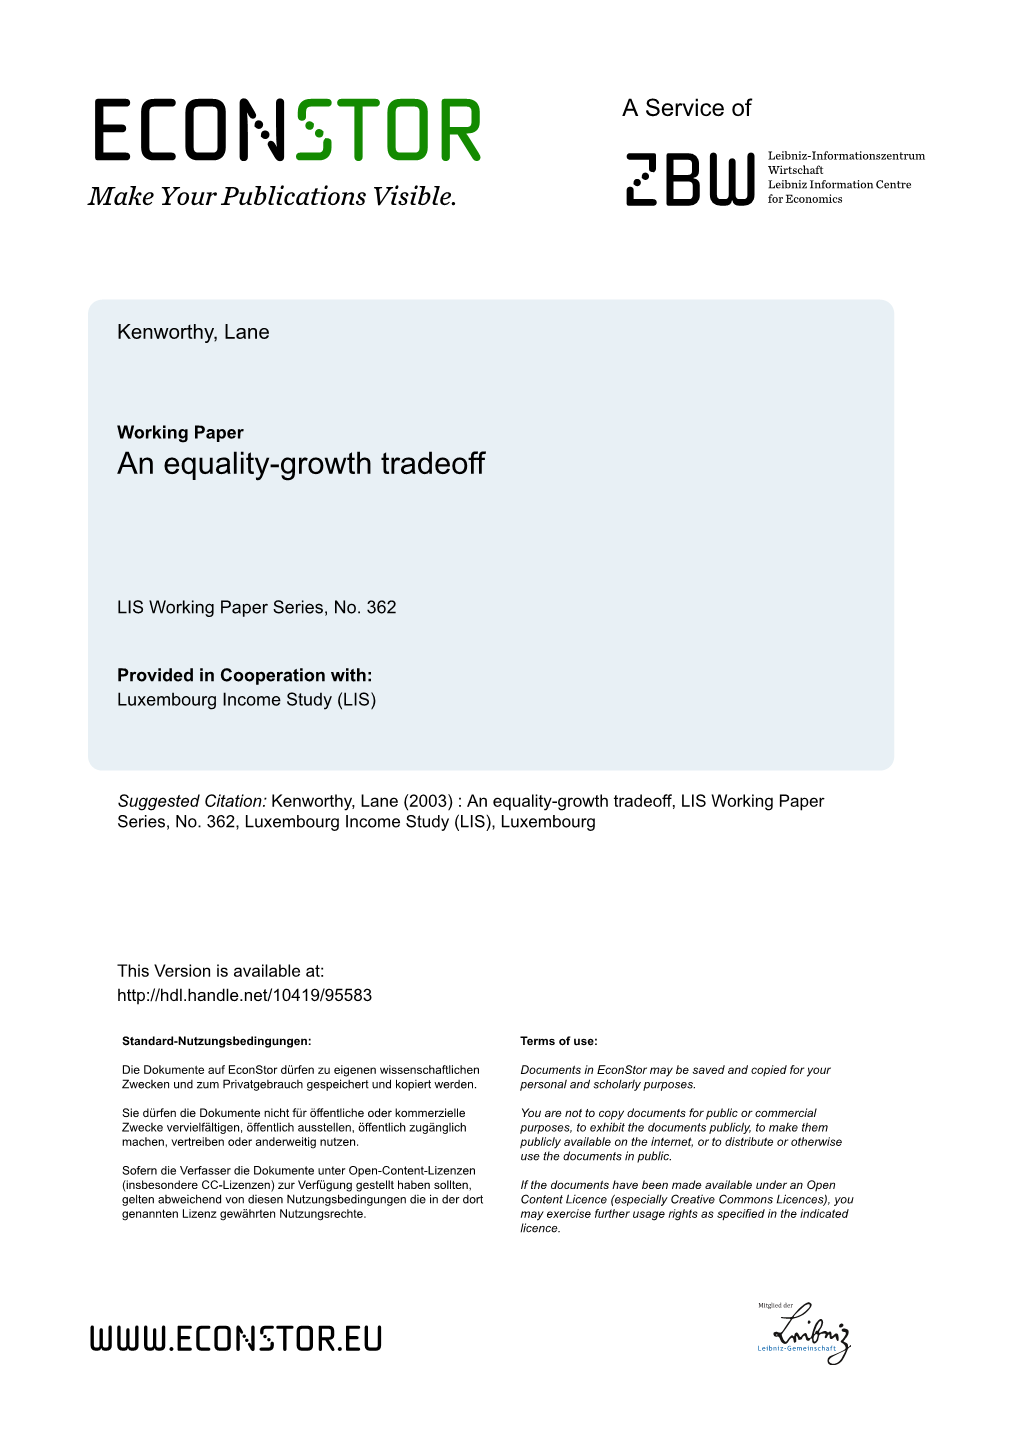 An Equality-Growth Tradeoff